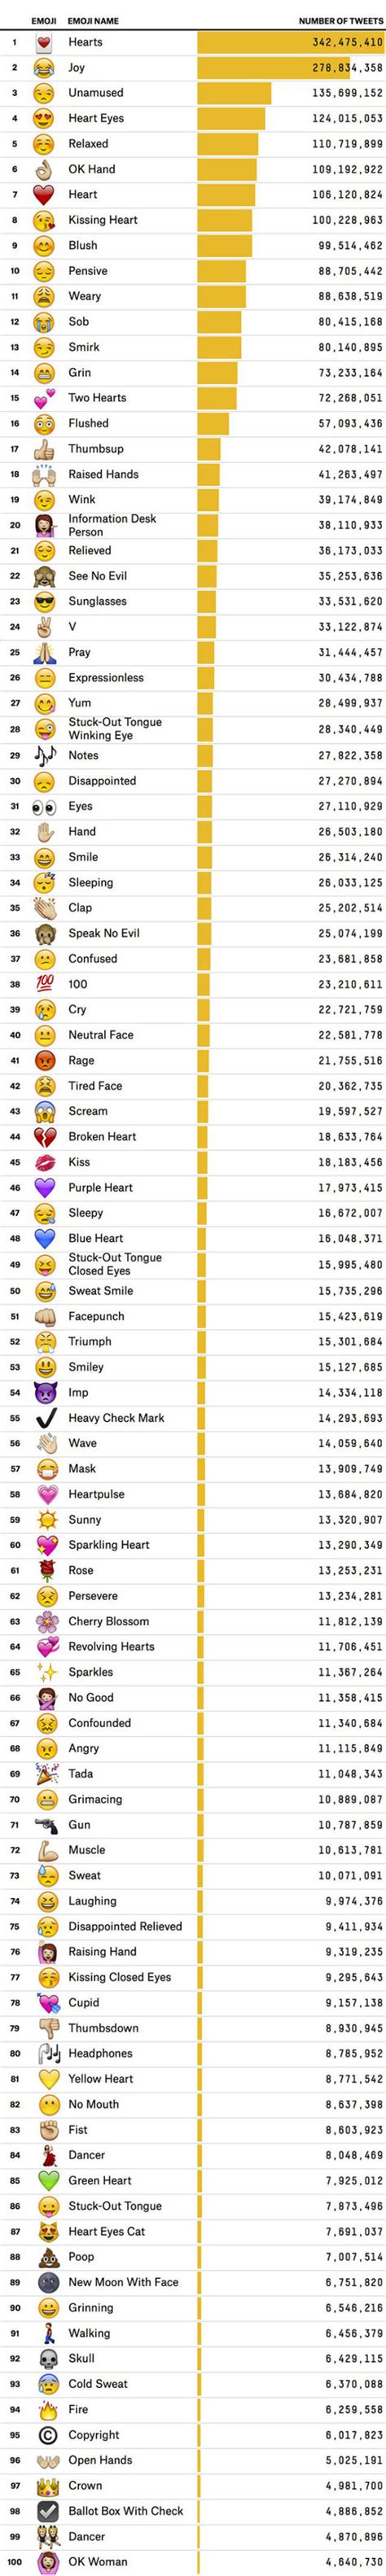 The Most Popular Emojis Used On Twitter Might Surprise You